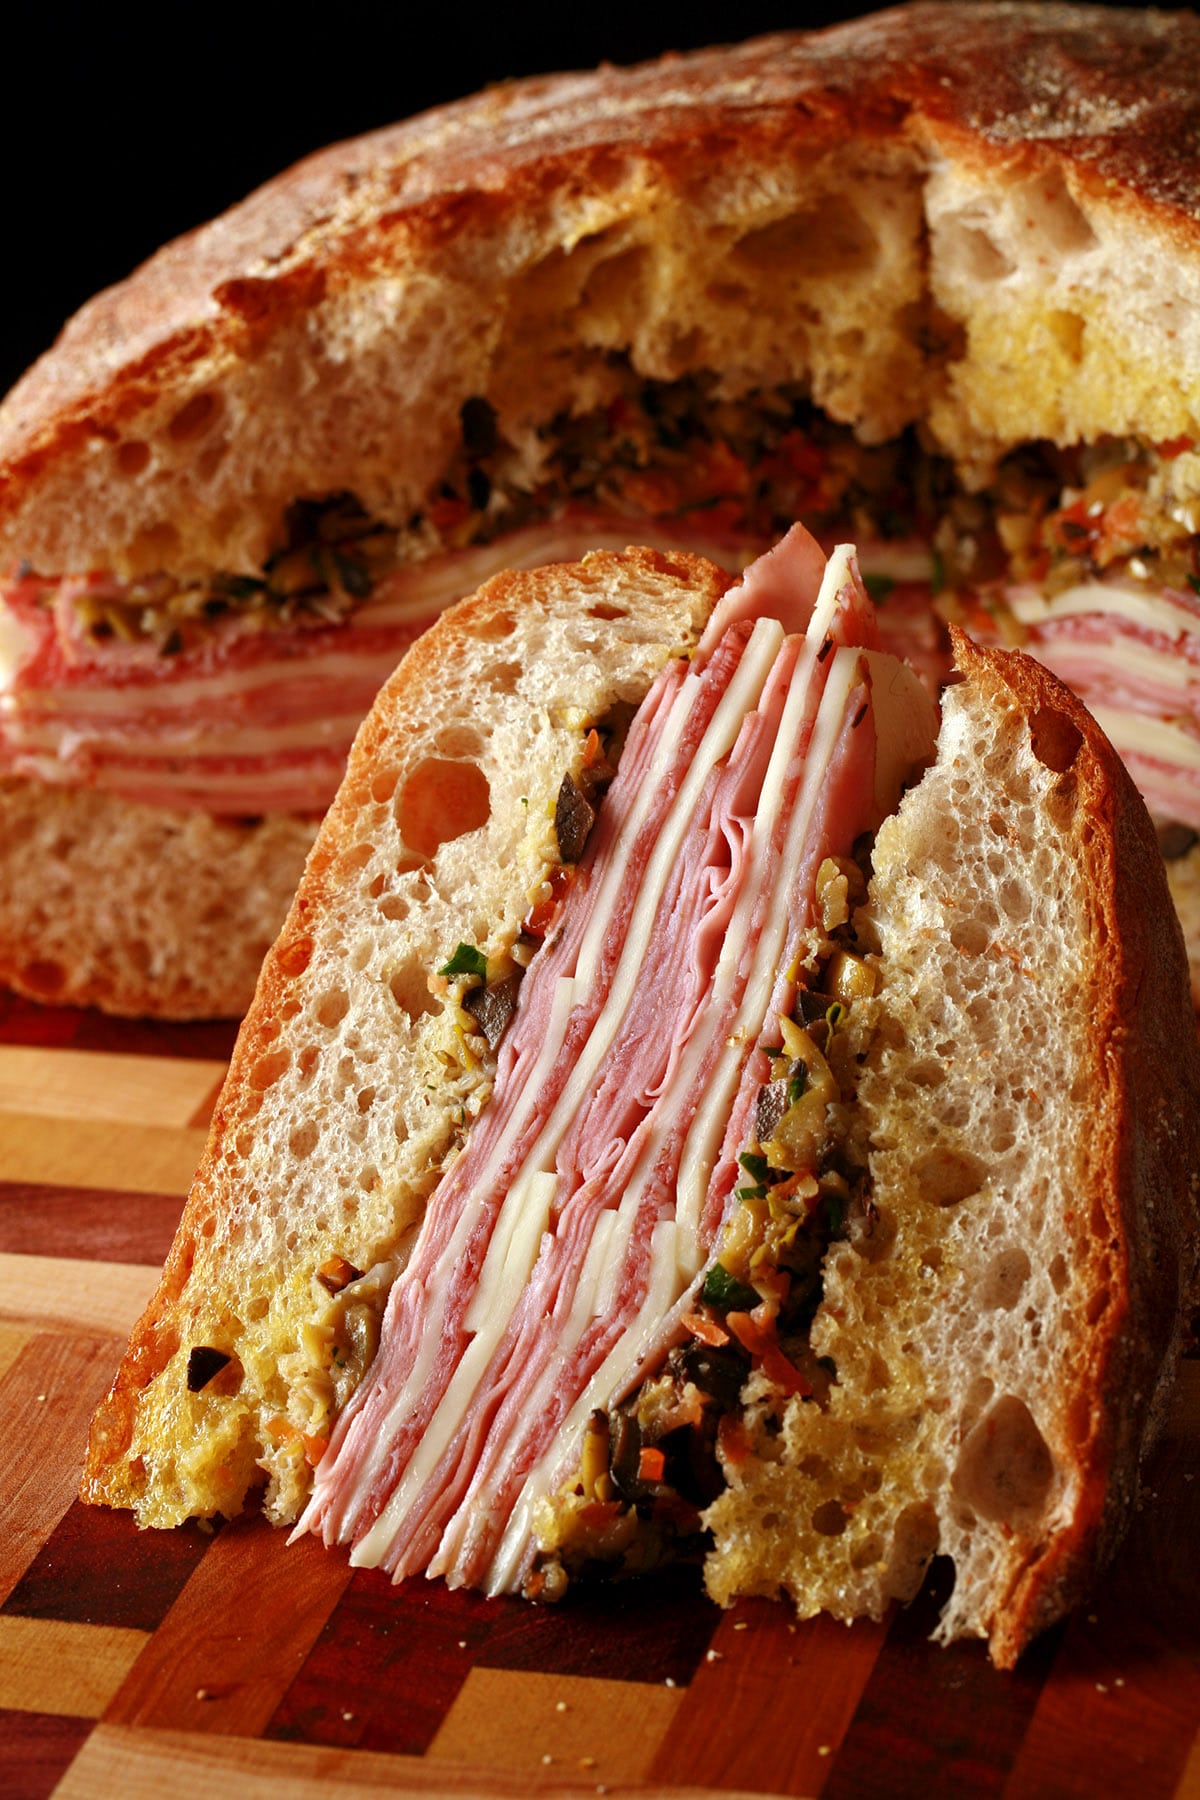 A close up view of a wedge of New Orleans Muffuletta, with the whole sandwich behind it.